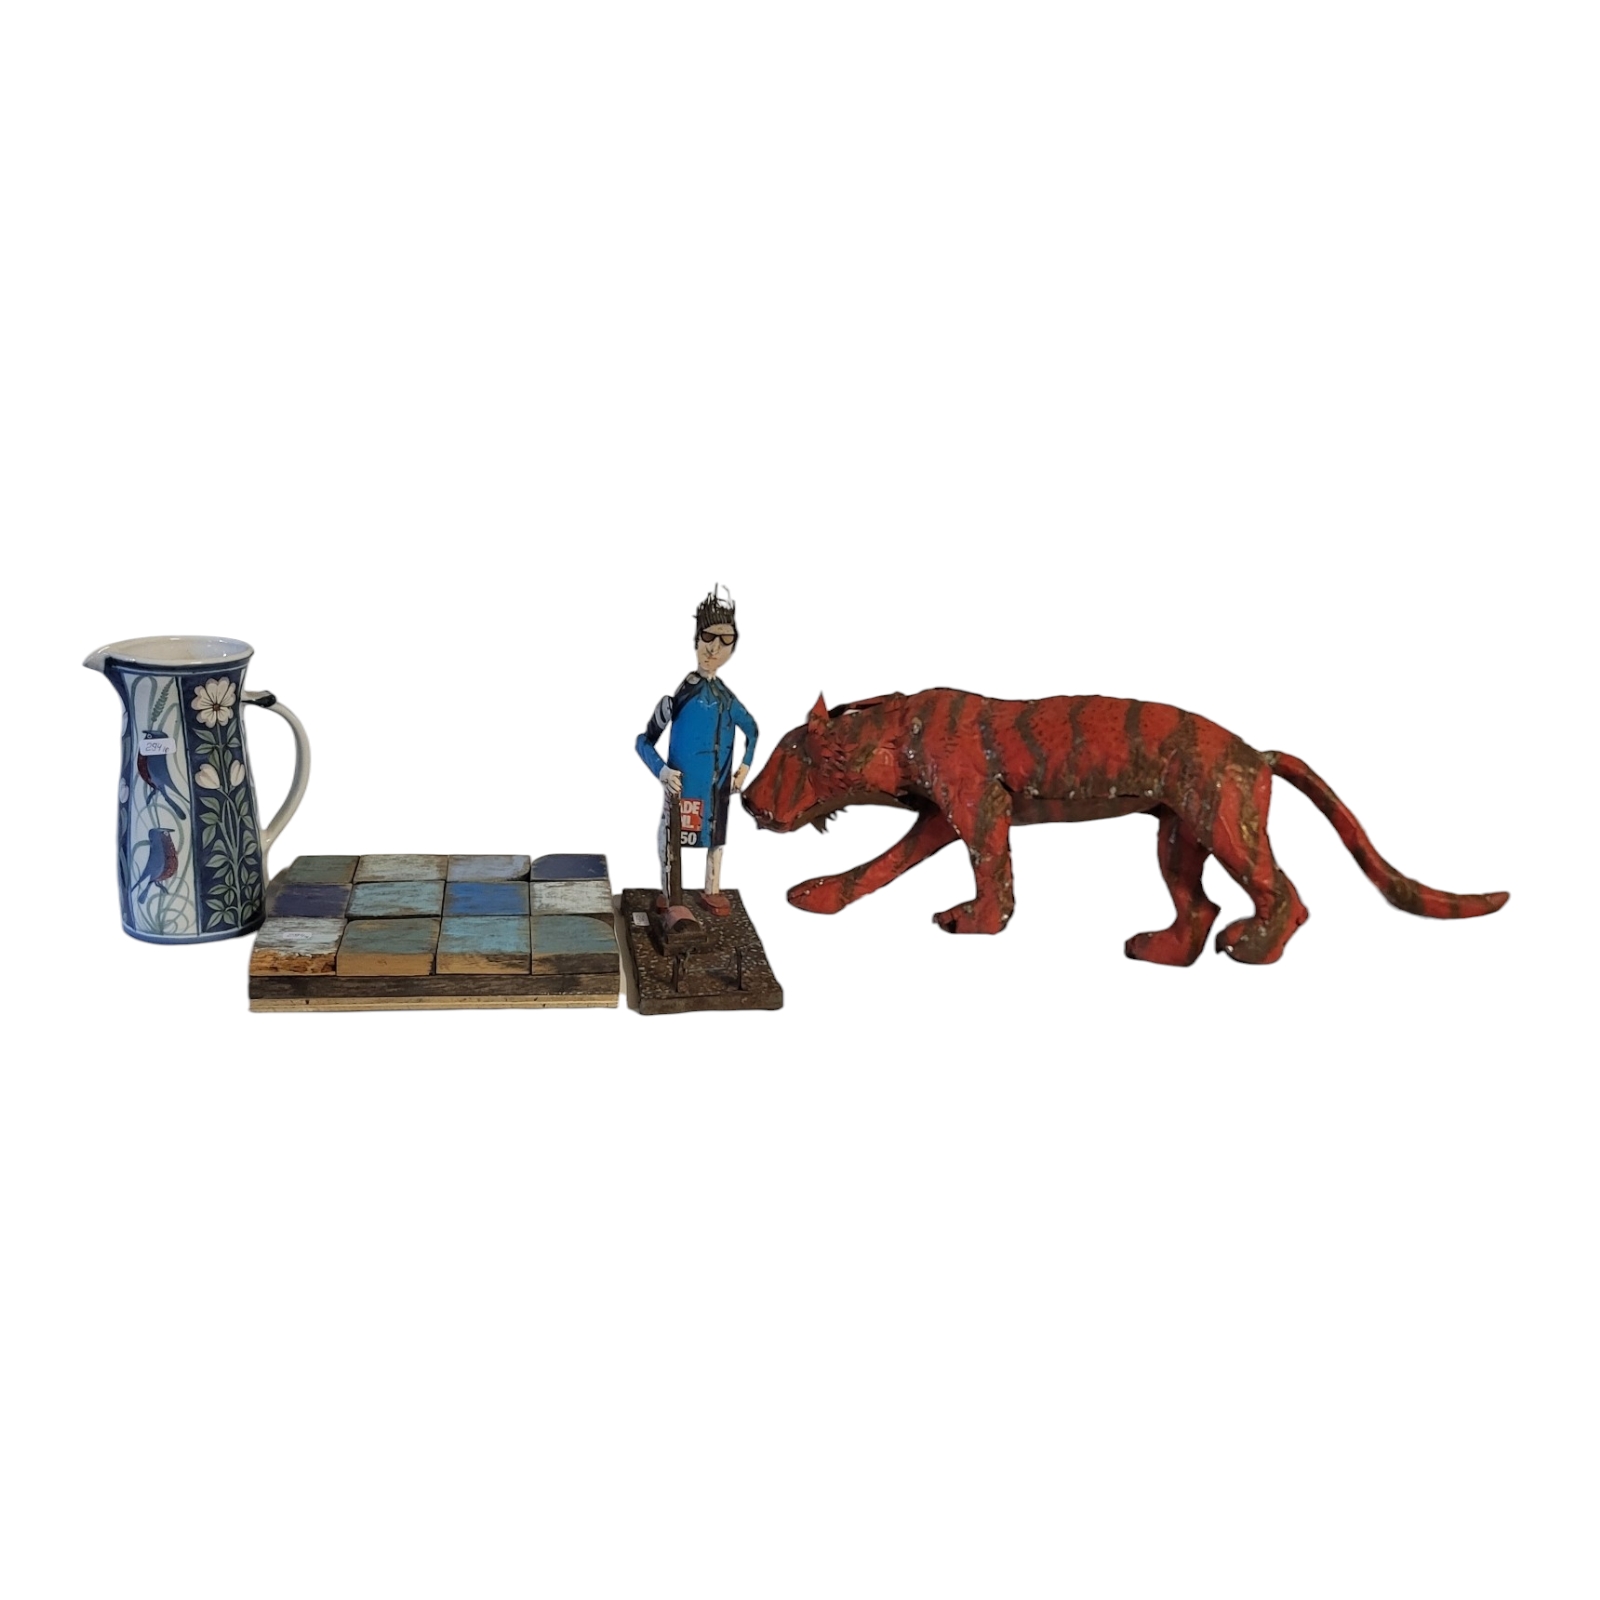 A LATE 20TH CENTURY HANDMADE TINPLATE MODEL OF A BENGAL TIGER Along with model of a housewife